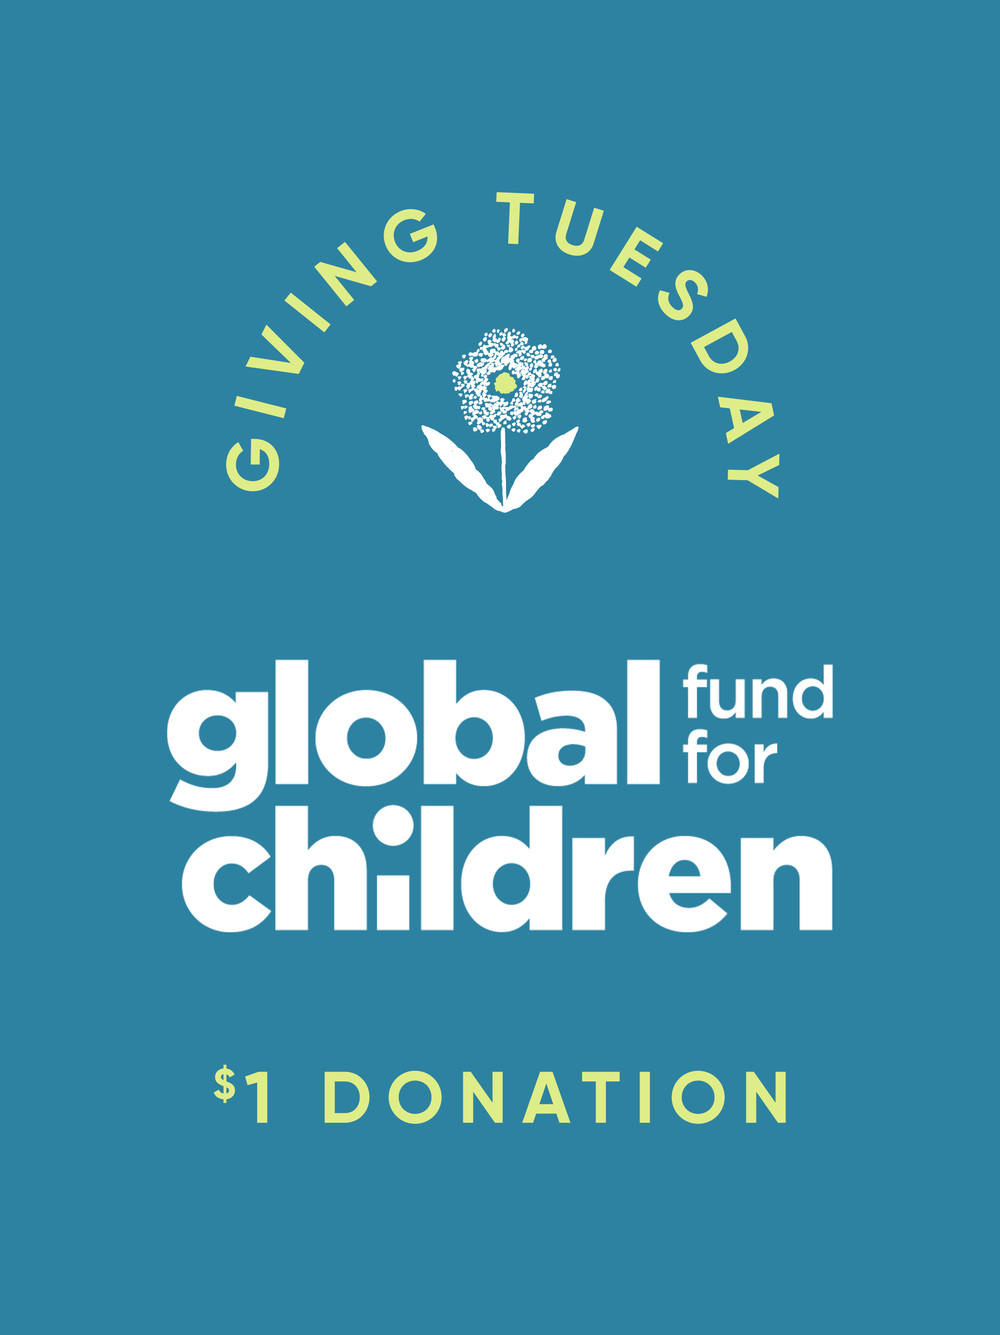 Donate $1 to Global Fund for Children